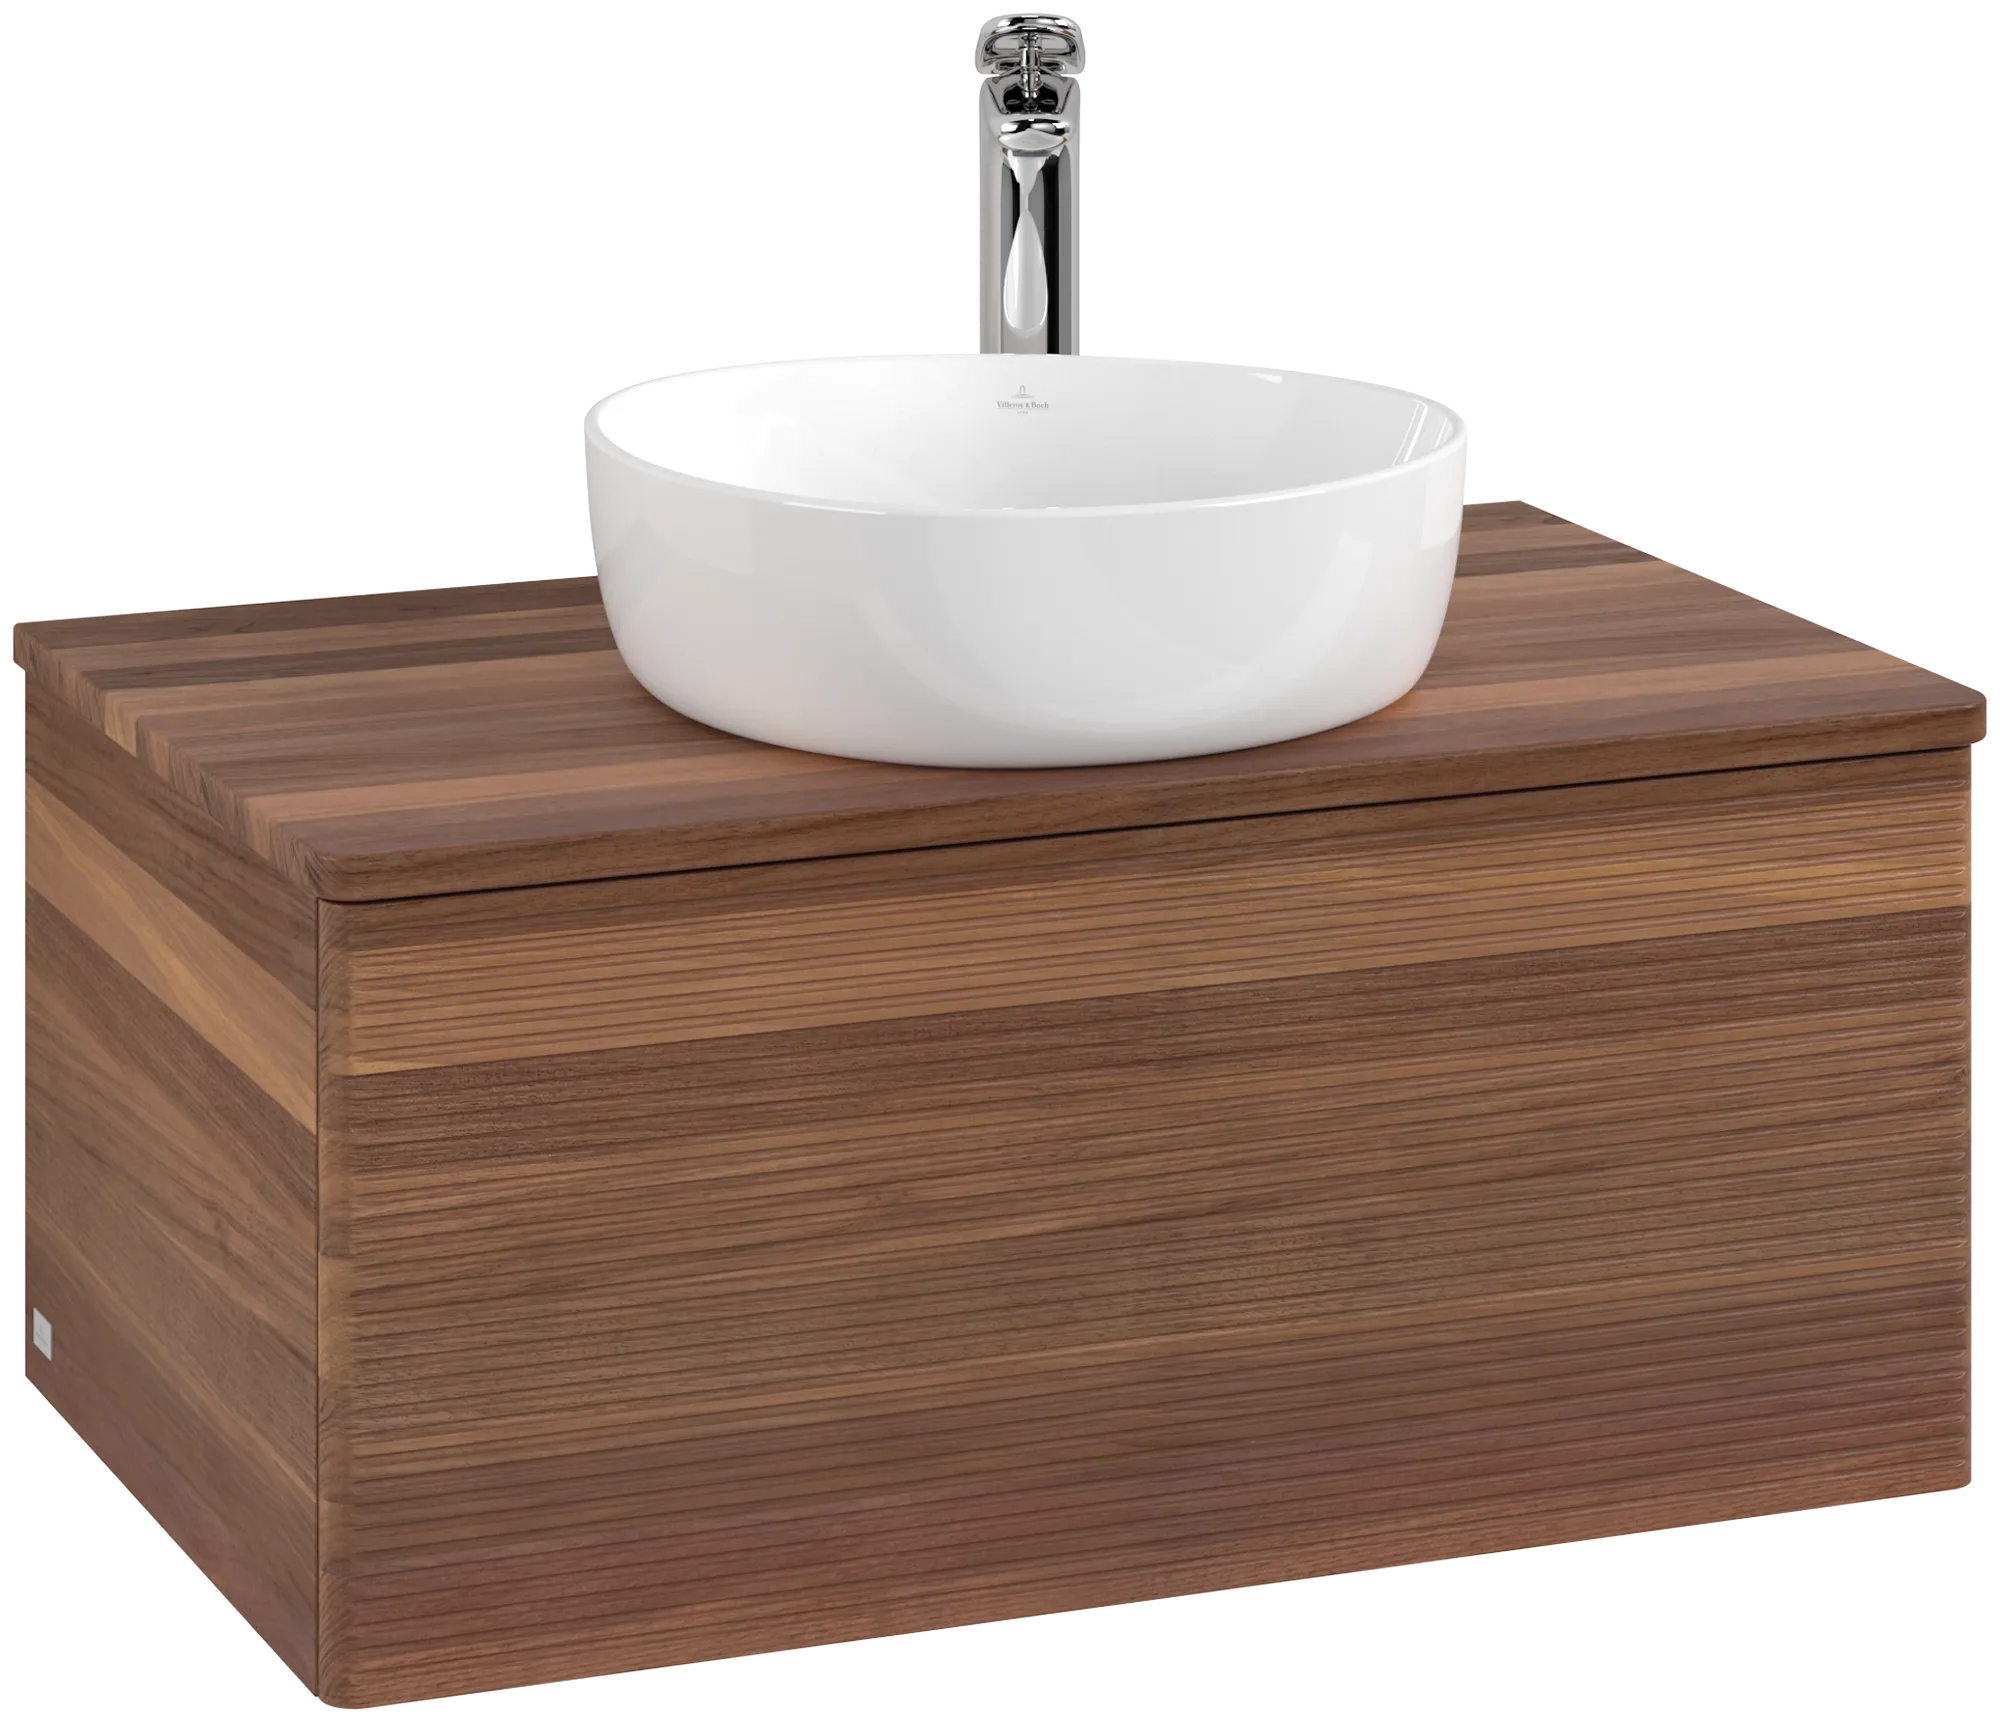 Obrázek VILLEROY BOCH Antao Vanity unit, with lighting, 1 pull-out compartment, 800 x 360 x 500 mm, Front with grain texture, Warm Walnut / Warm Walnut #L30152HM